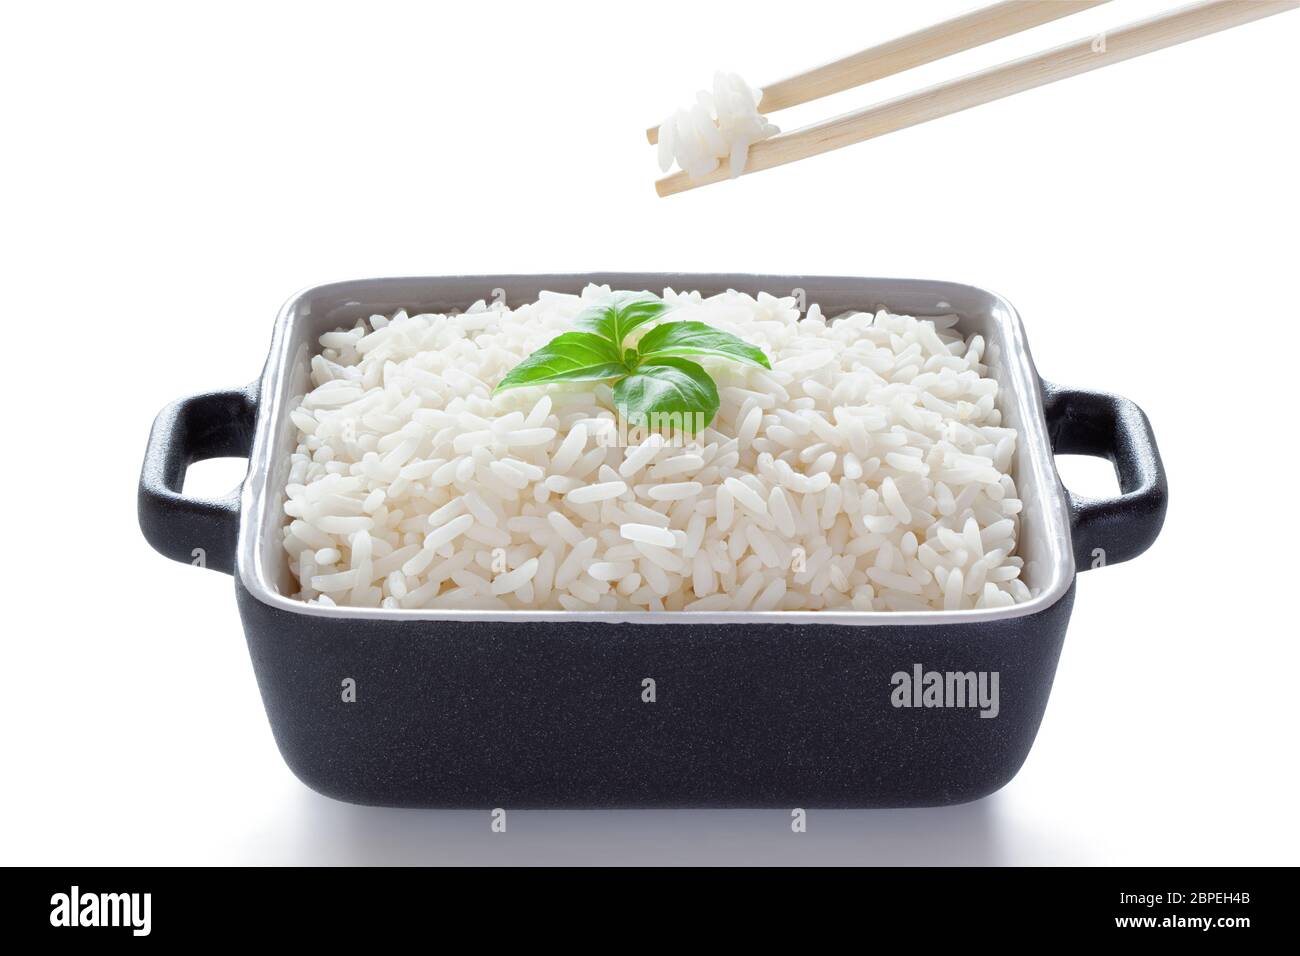 Rice with basil eaten from ceramic bowl with wooden chopsticks, isolated on the white background, clipping path included. Stock Photo